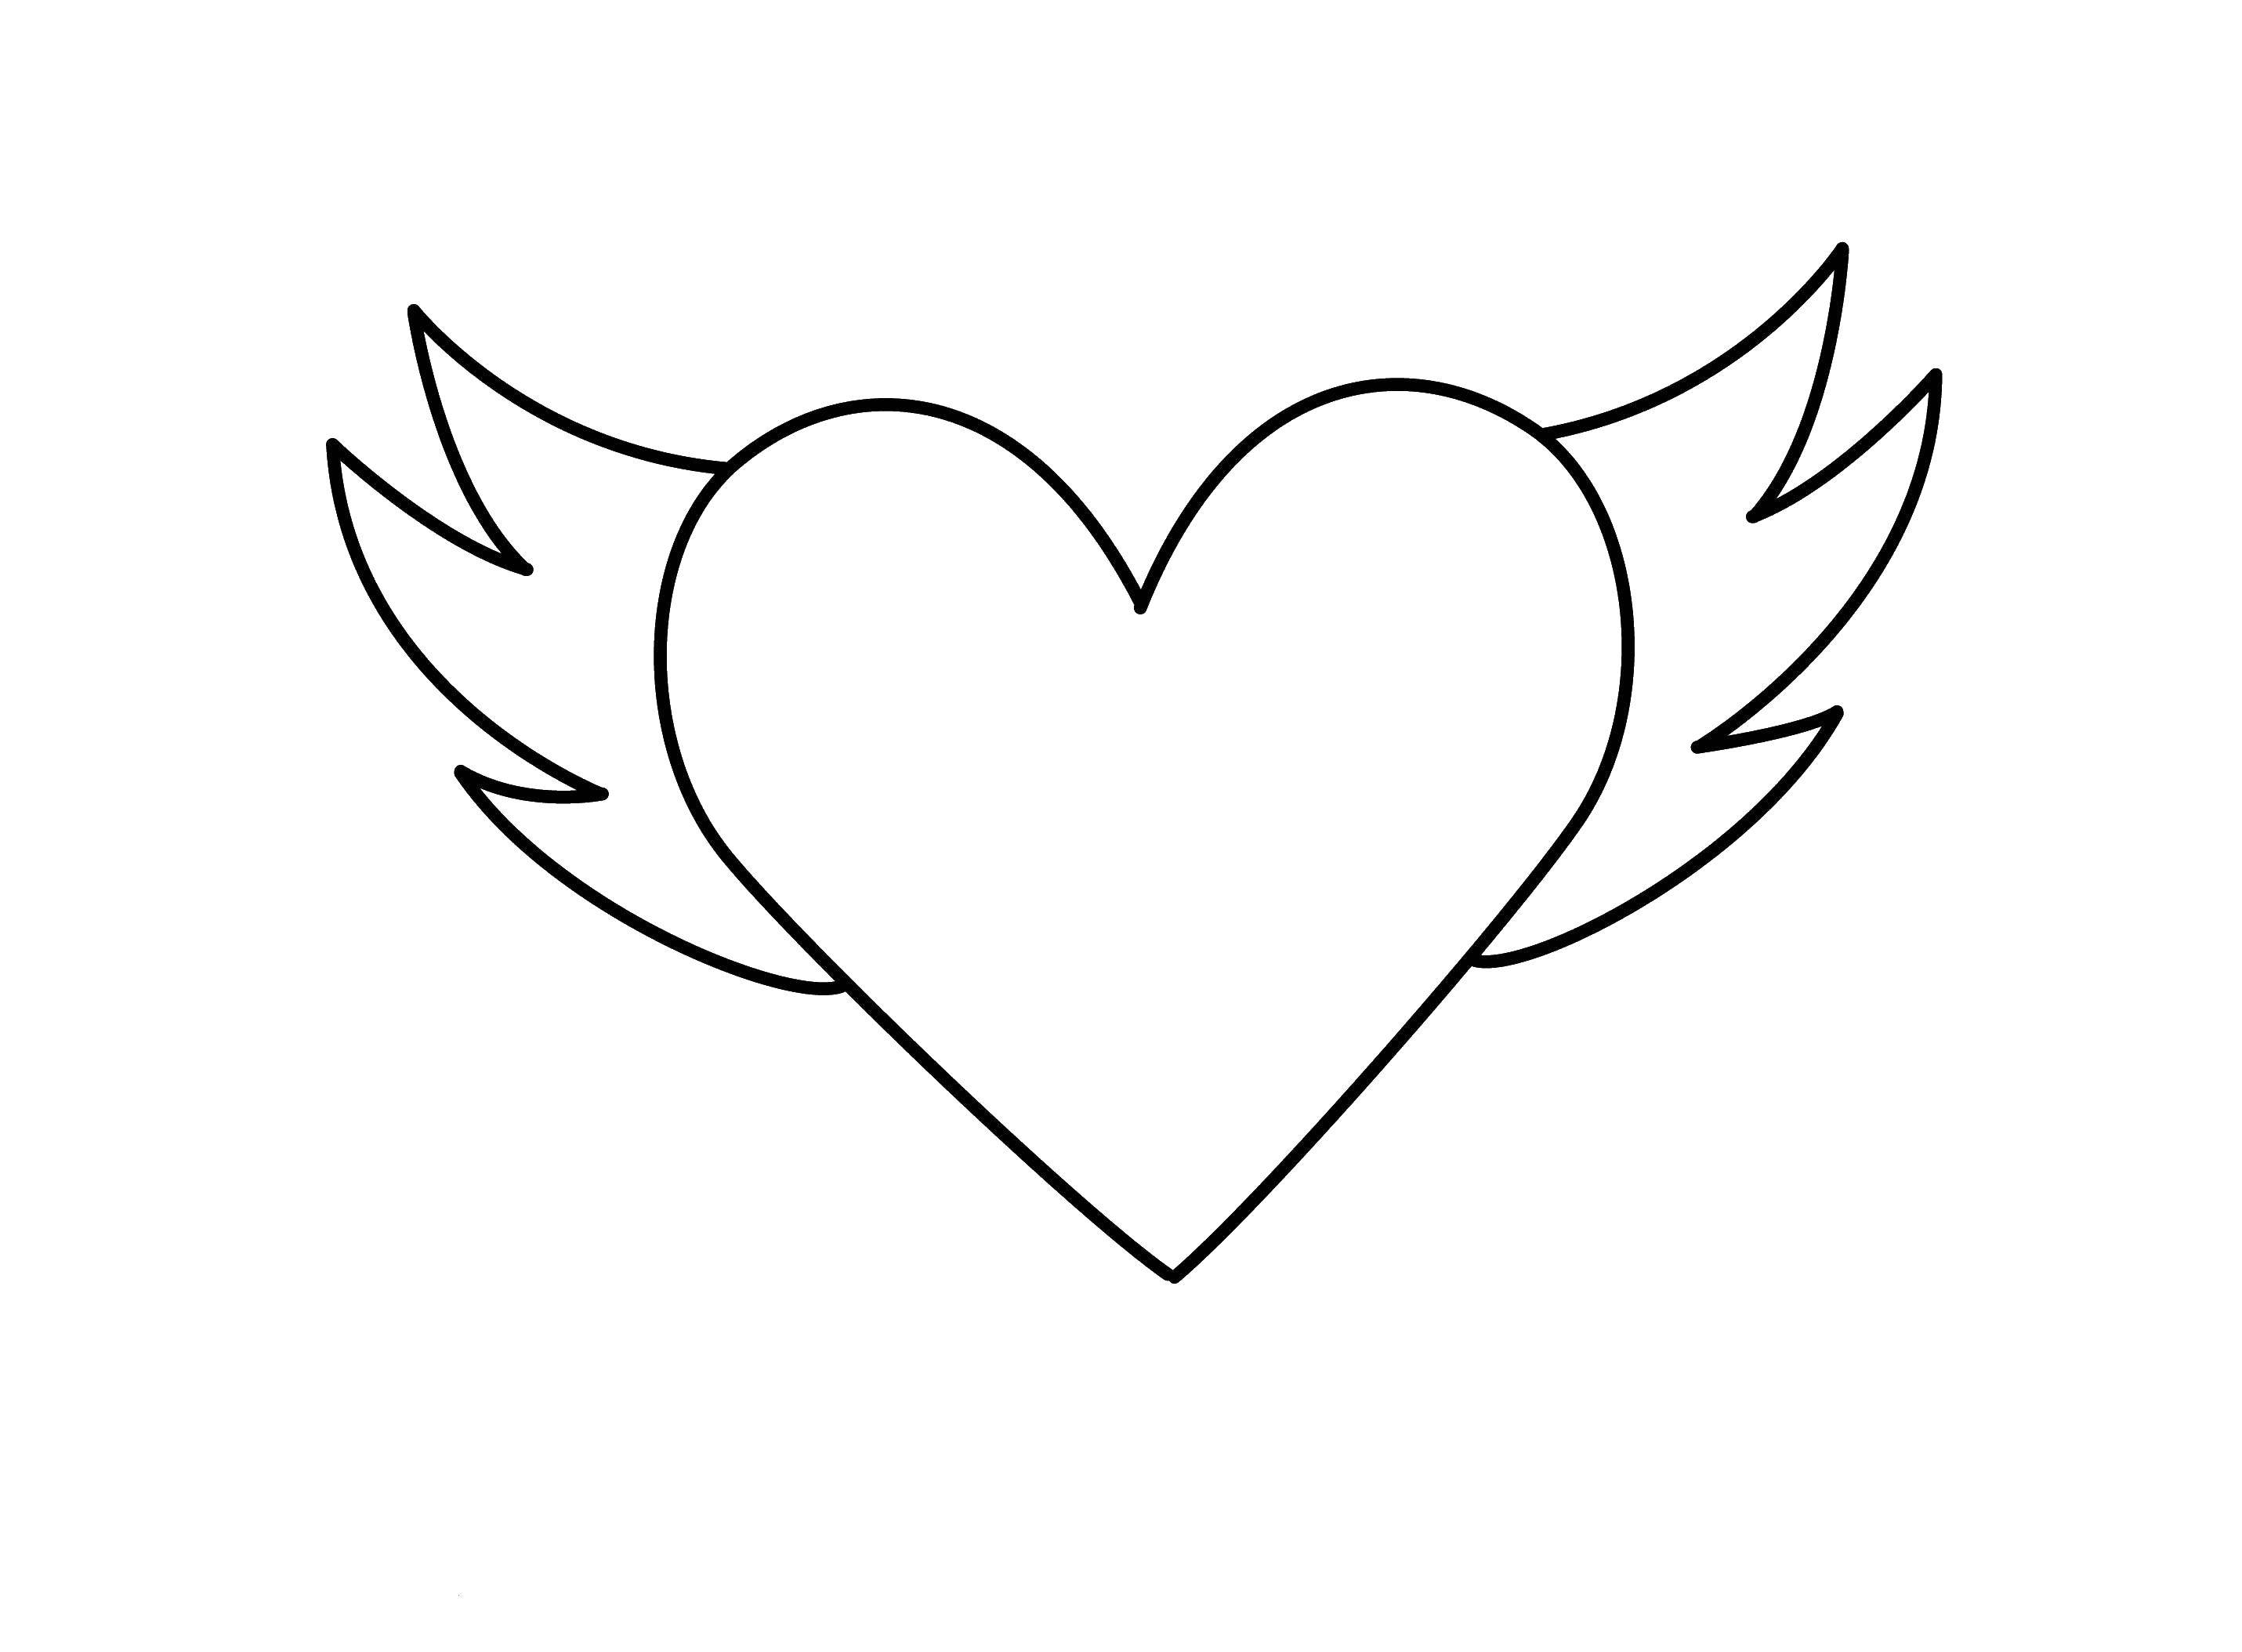 Coloring Heart with wings. Category Valentines day. Tags:  Valentines day, love, heart.